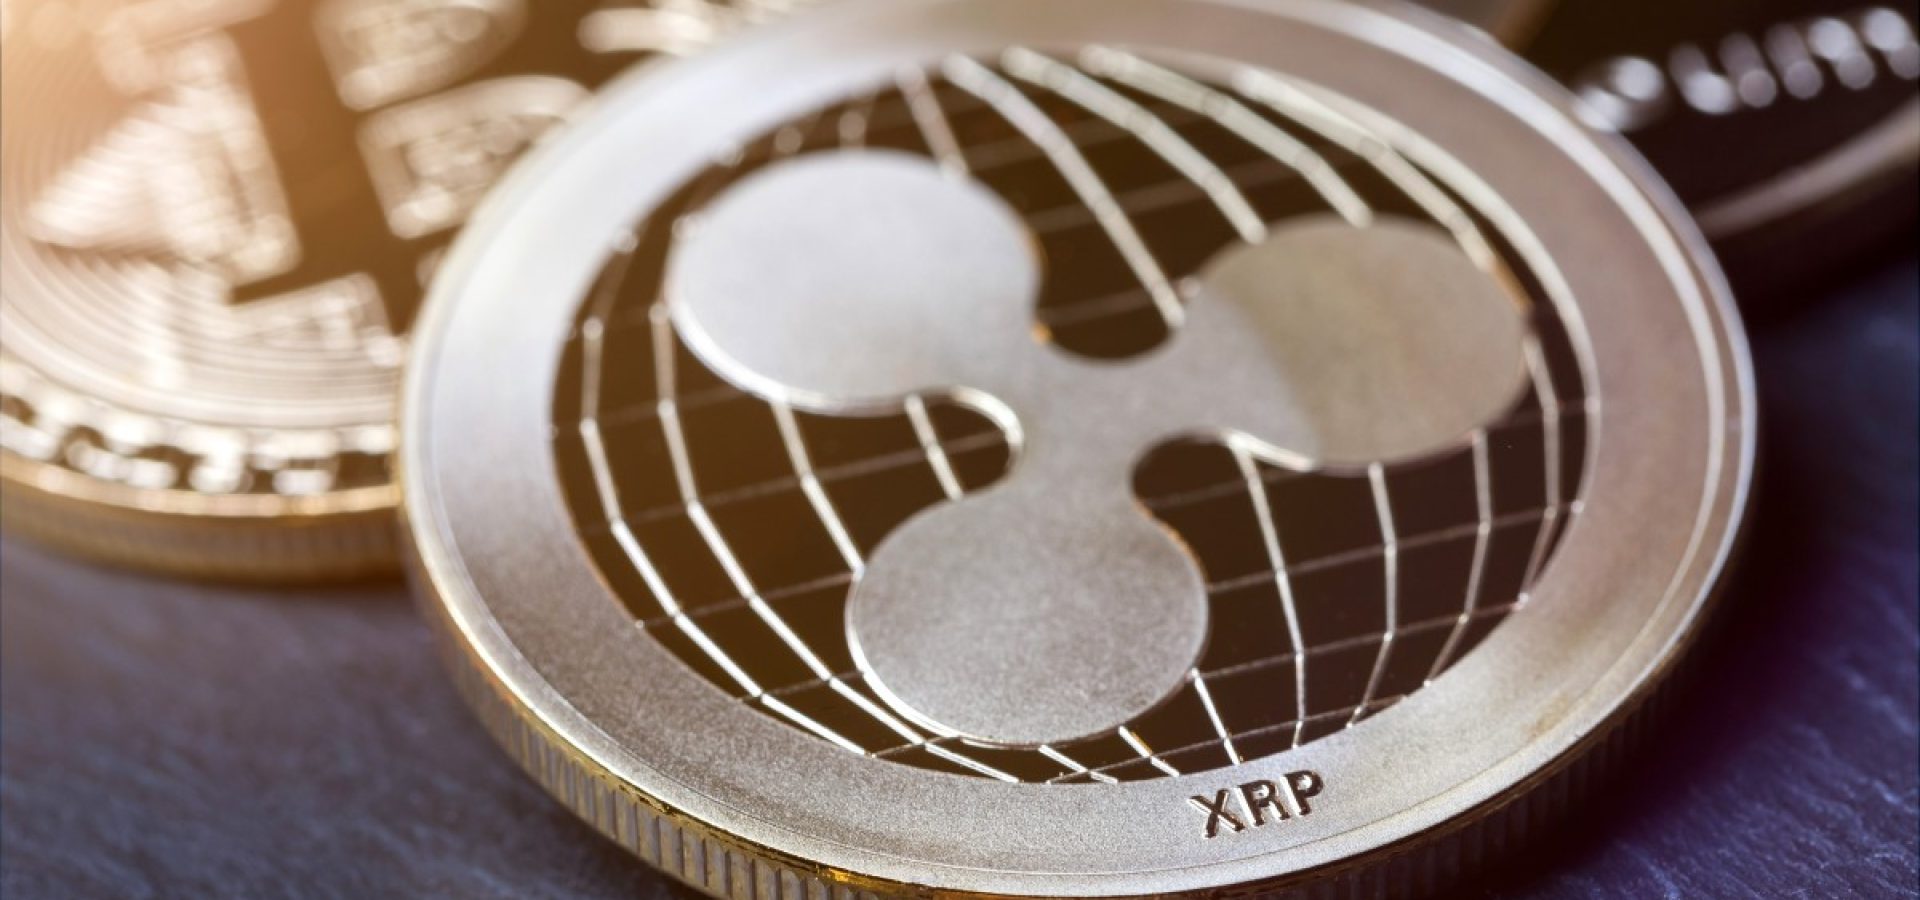 XRP and regulations